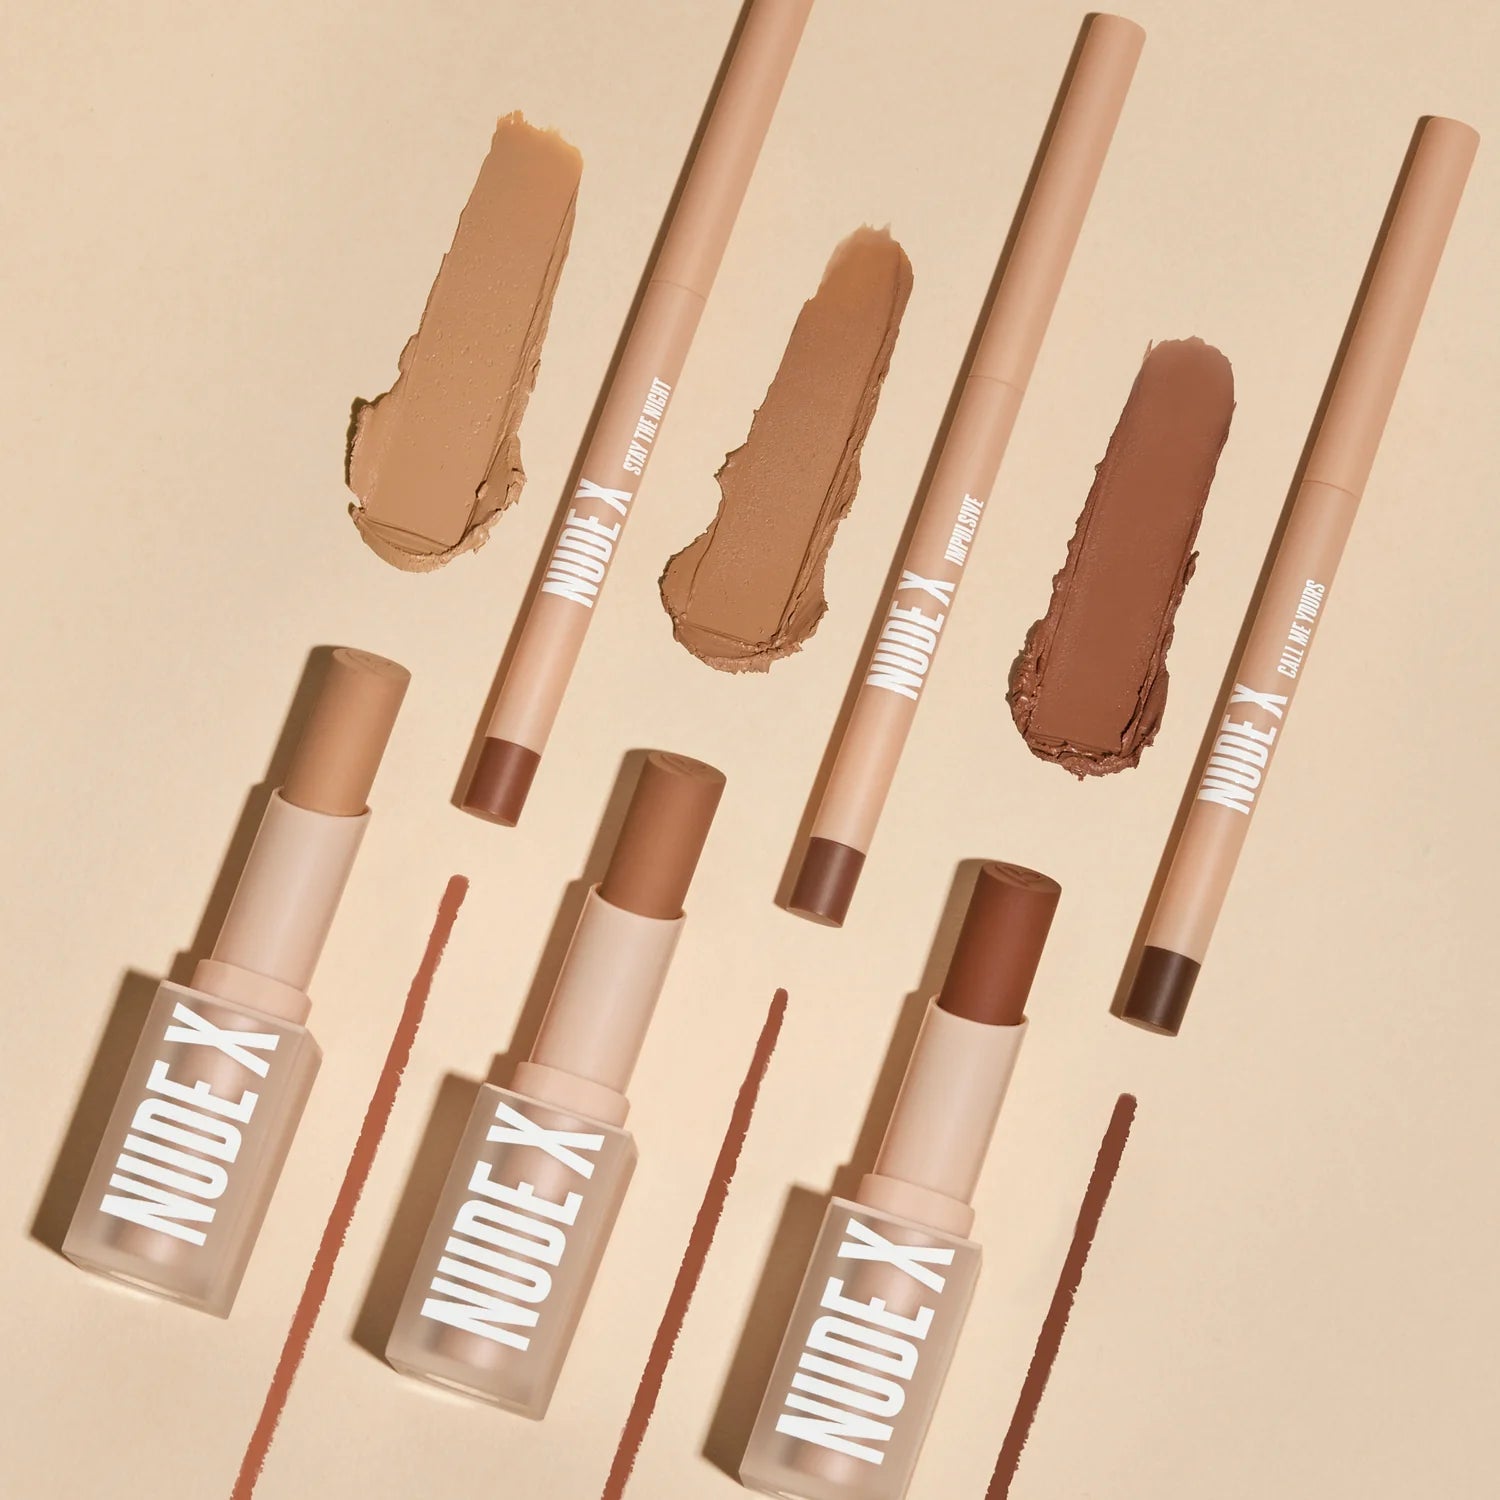 BC-2.23-Styled-Your-Best-Nude-Lip-Set-1-square_1500x_361d5677-9ca3-4543-9130-beea9862039f.webp